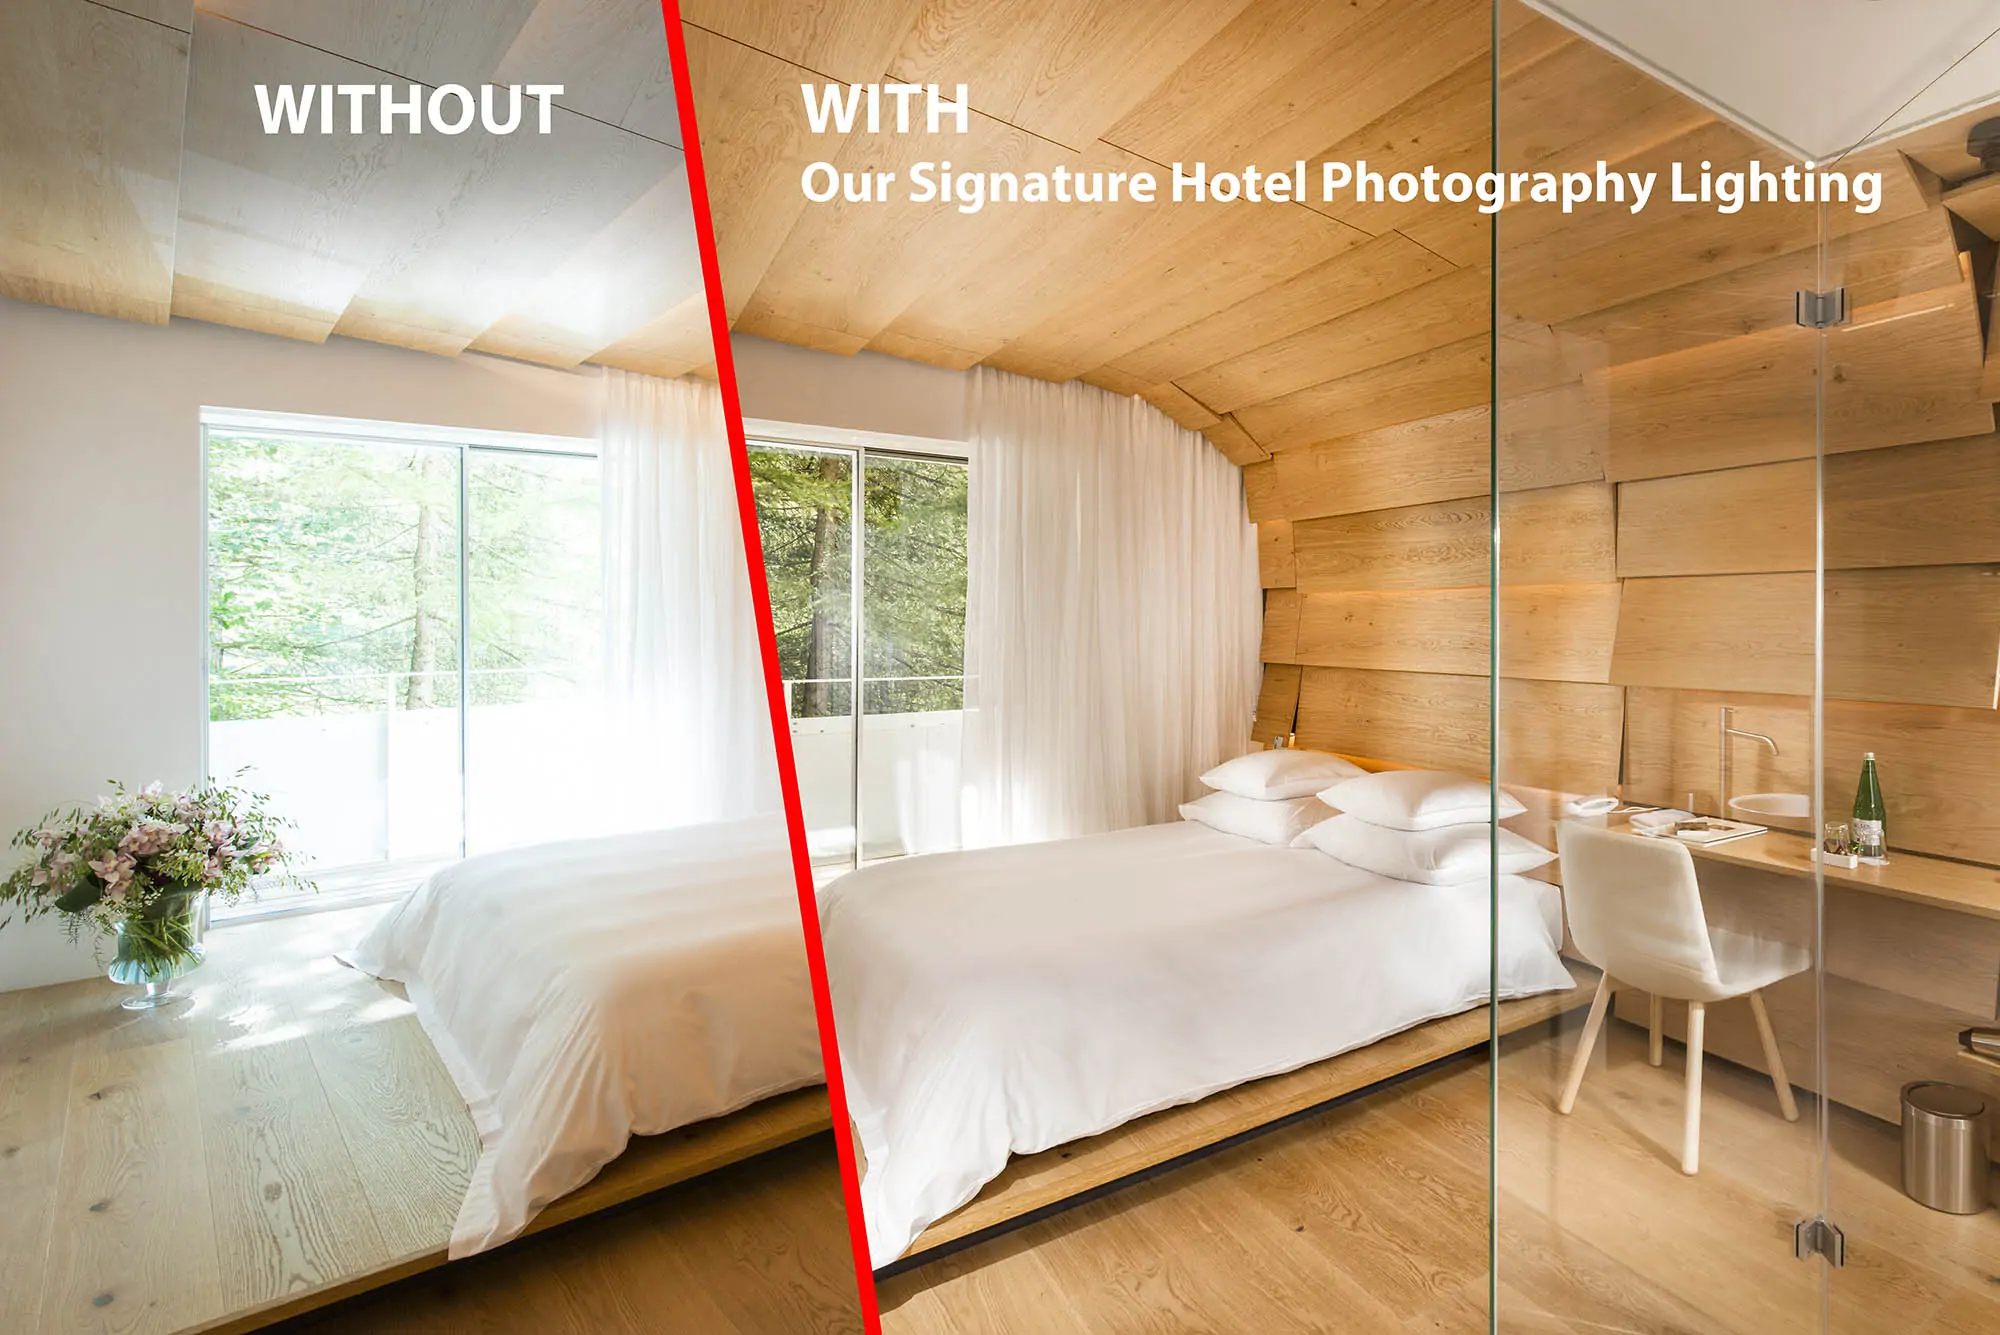 Hotel Room With and Without Photography Lighting